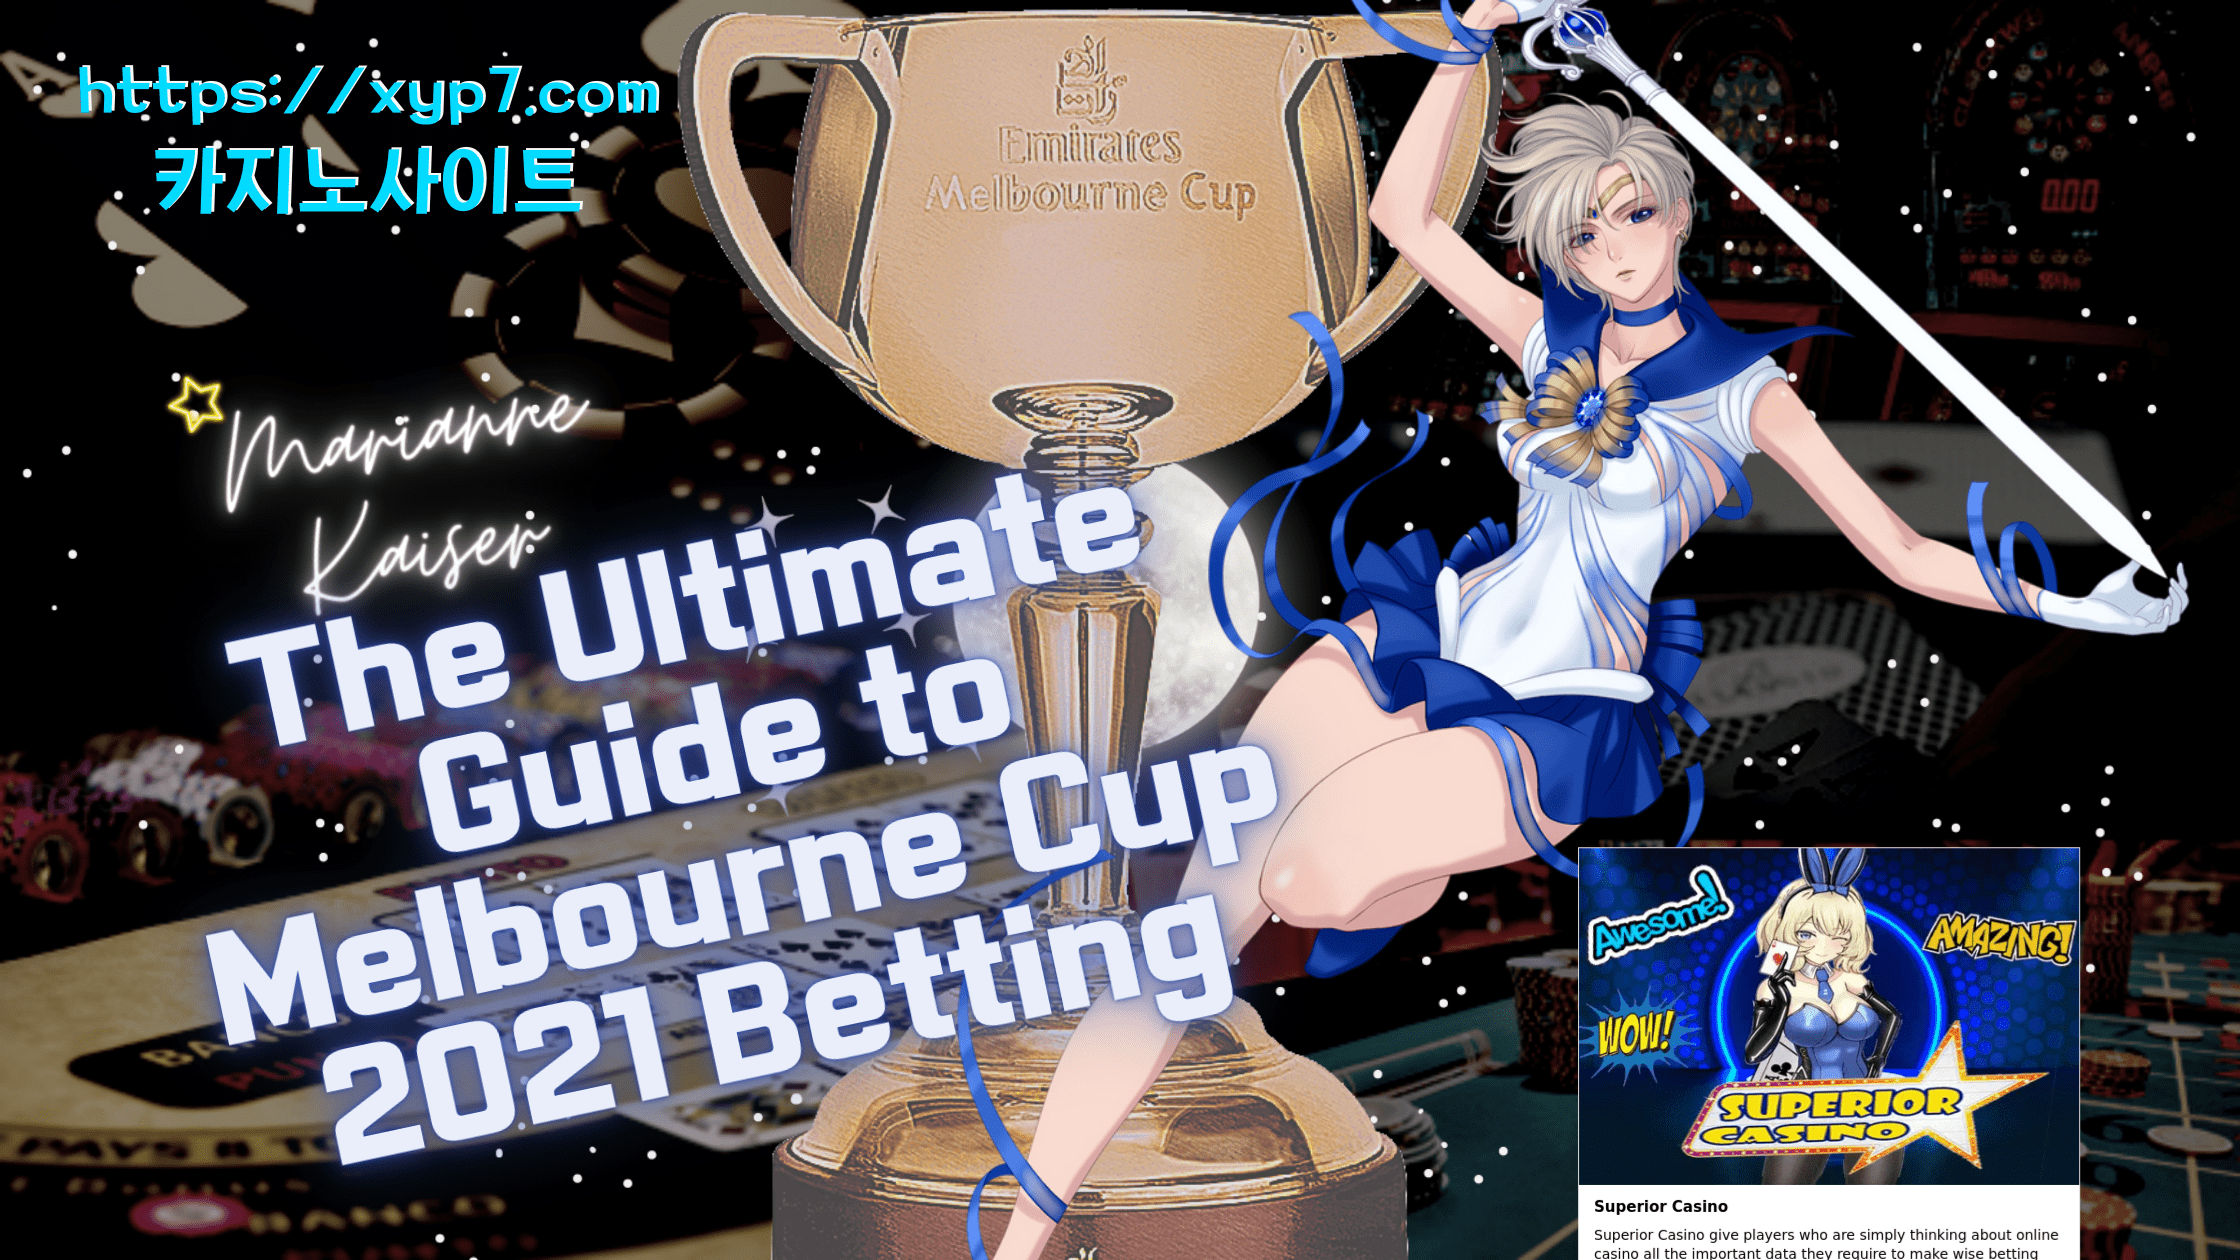 The Ultimate Guide to Melbourne Cup 2021 Betting